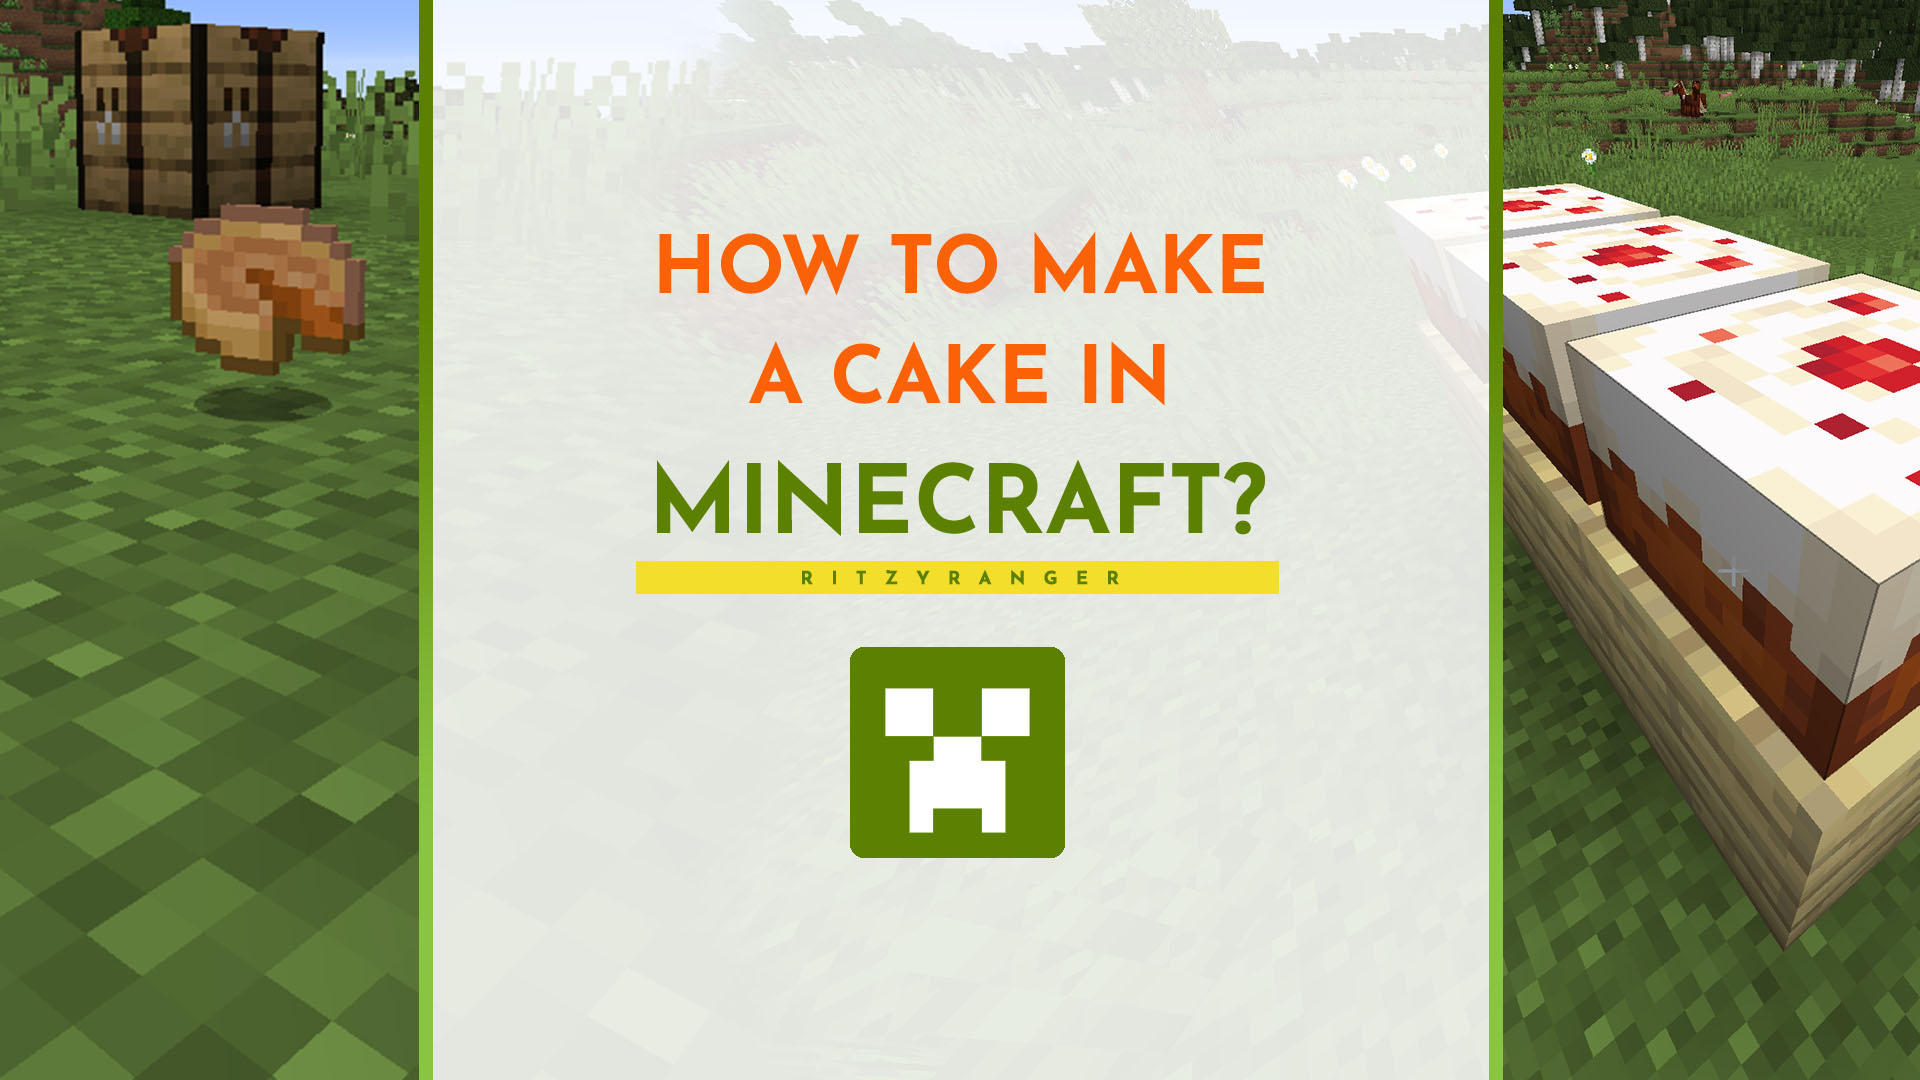 How to make a cake in Minecraft?